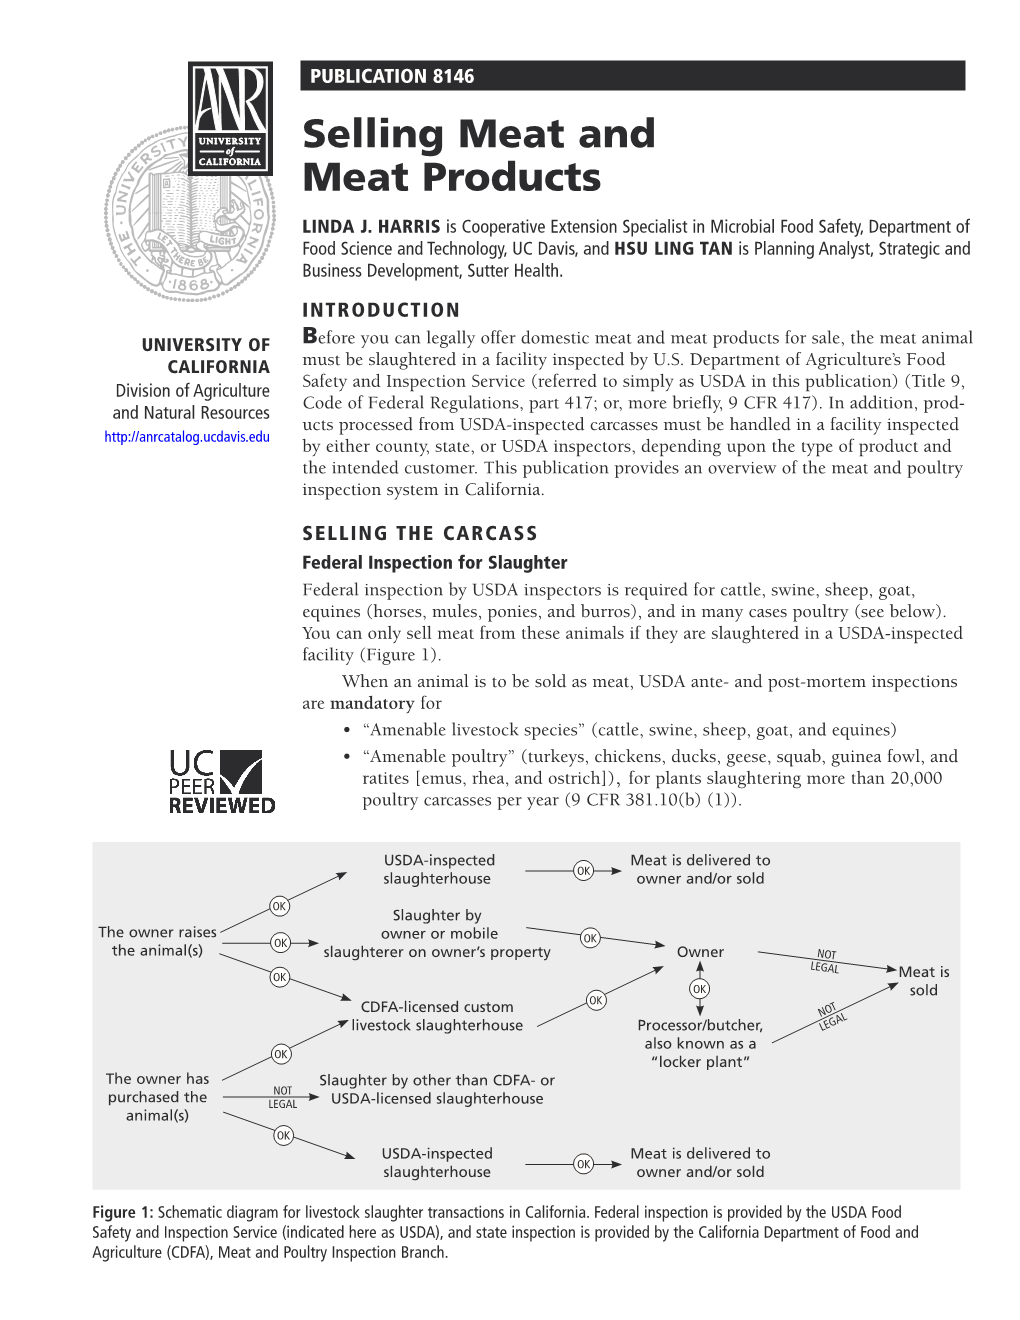 Selling Meat and Meat Products